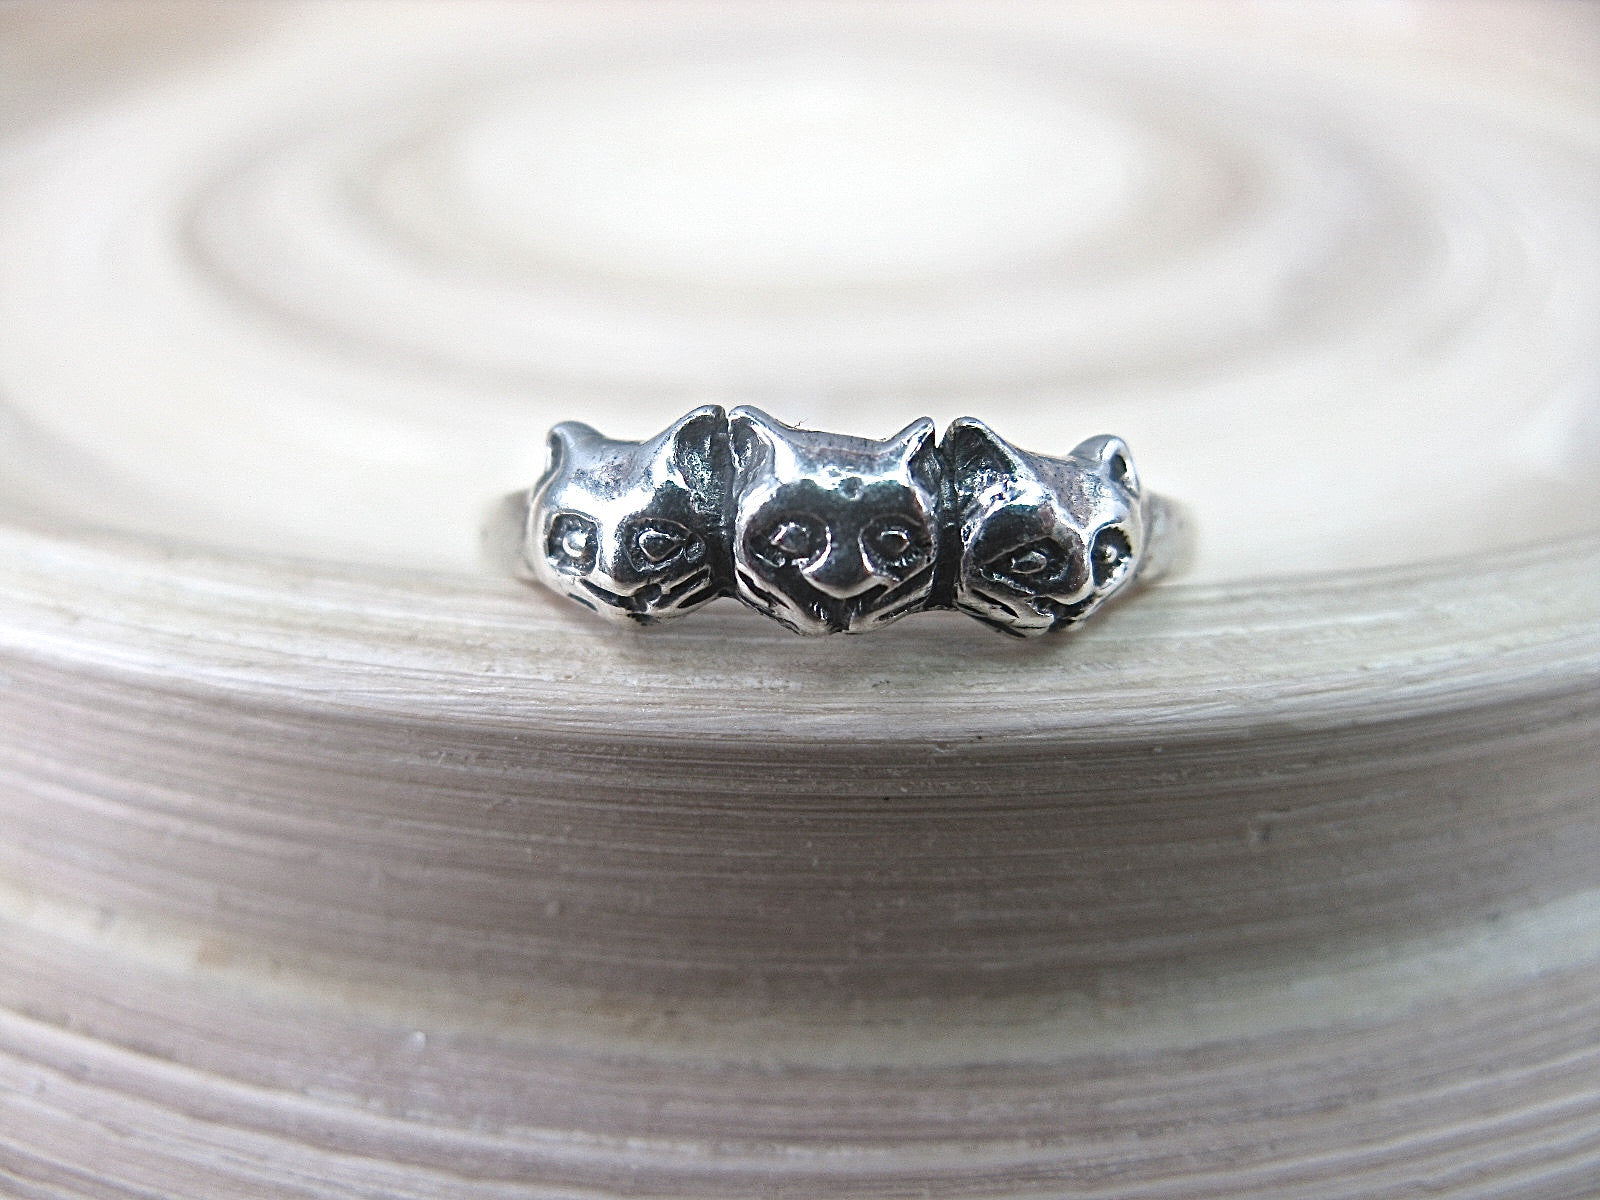 3 Cats Ring Sterling Silver Ring - Faith Owl